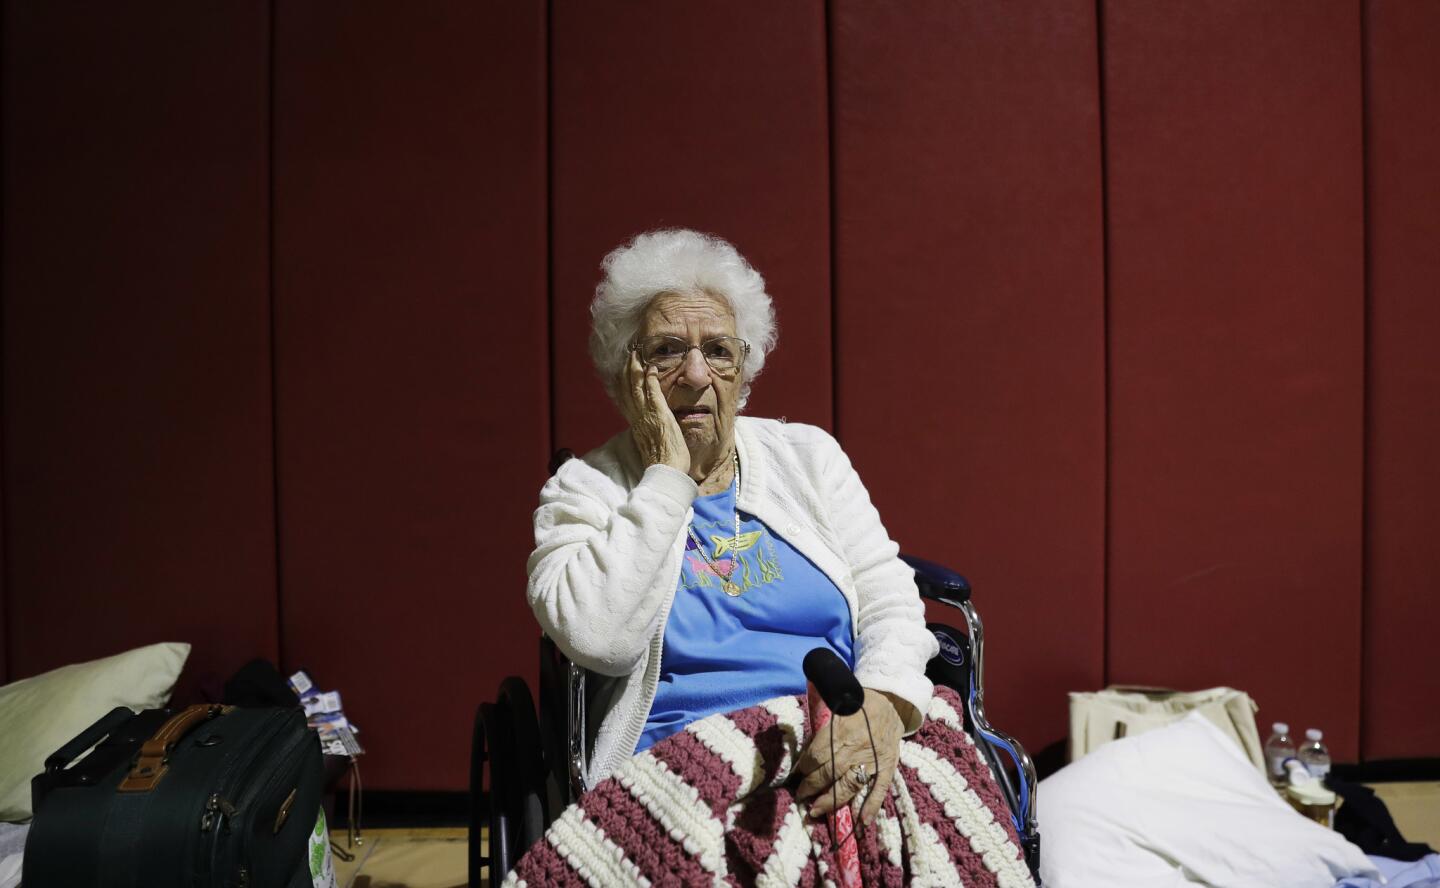 Mary Della Ratta, 94, sits in a shelter Sept. 10, 2017, after evacuating her home in Naples, Fla., with the help of police ahead of Hurricane Irma. "I'm afraid of what's going to happen. I don't know what I'll find when I go home," said Della Ratta, whose husband died 10 years ago. "I have nobody. I'm all alone in this world."